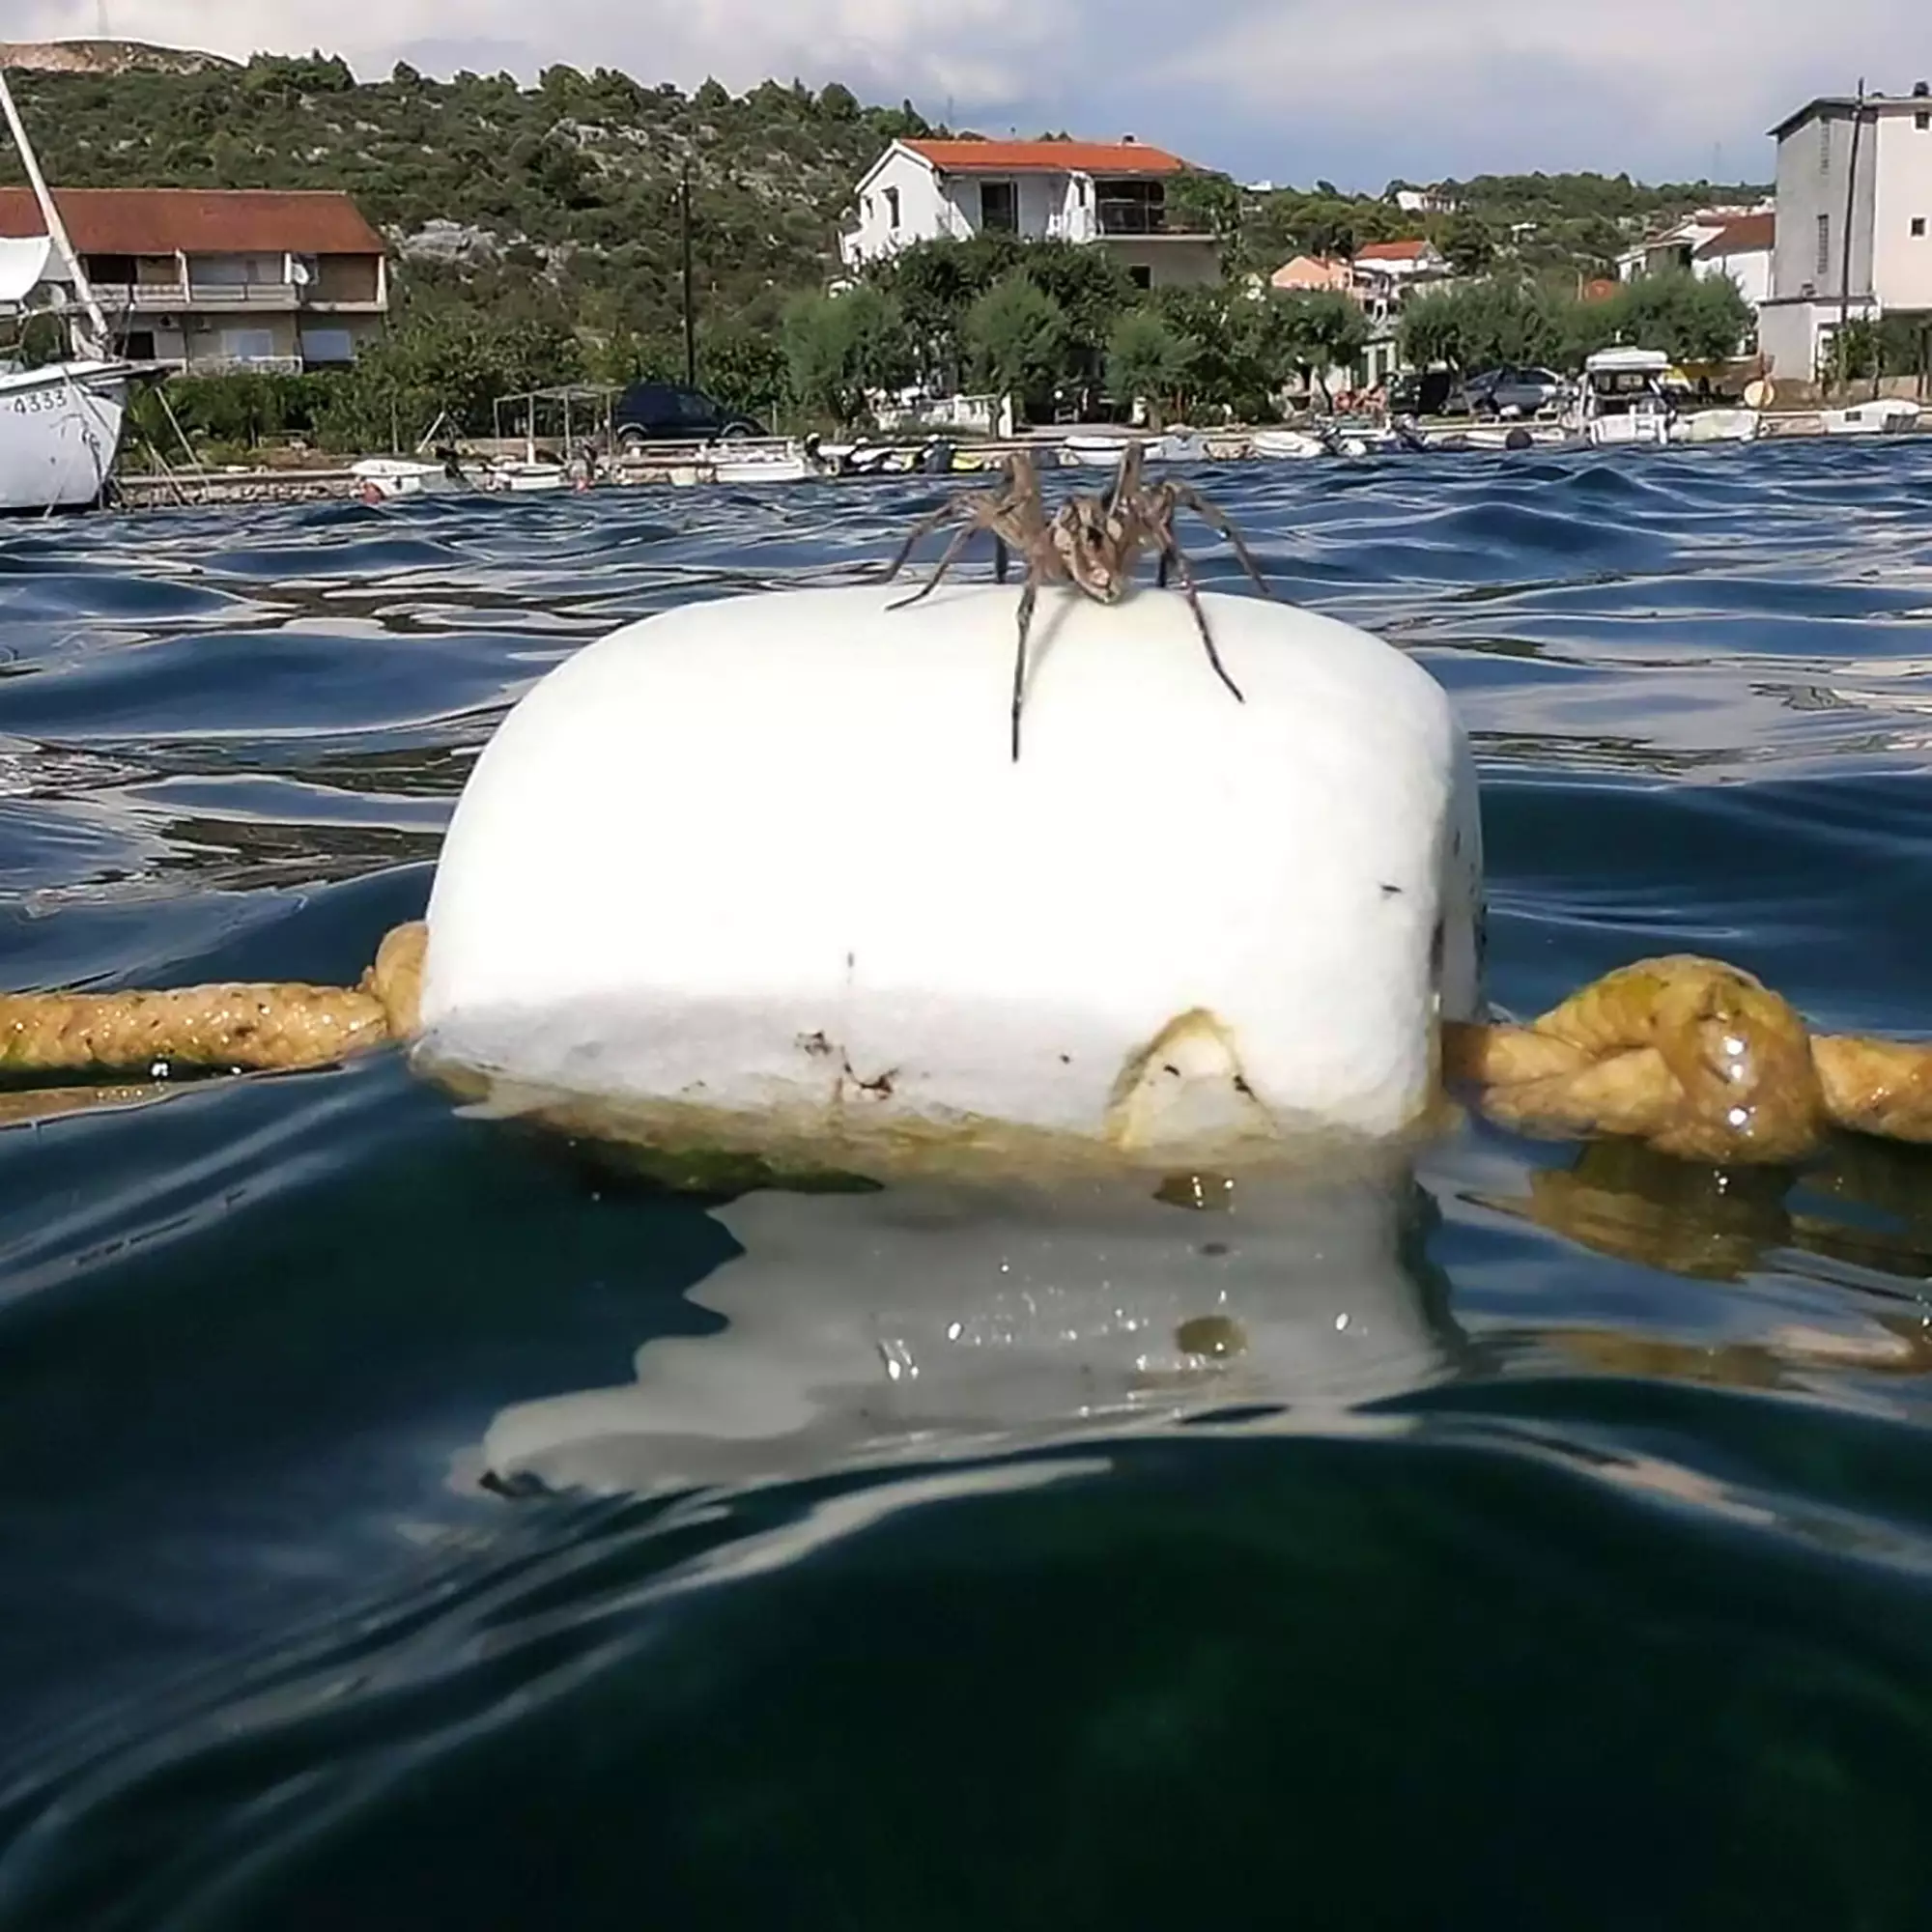 Nothing to see here, just a spider chilling on a buoy.